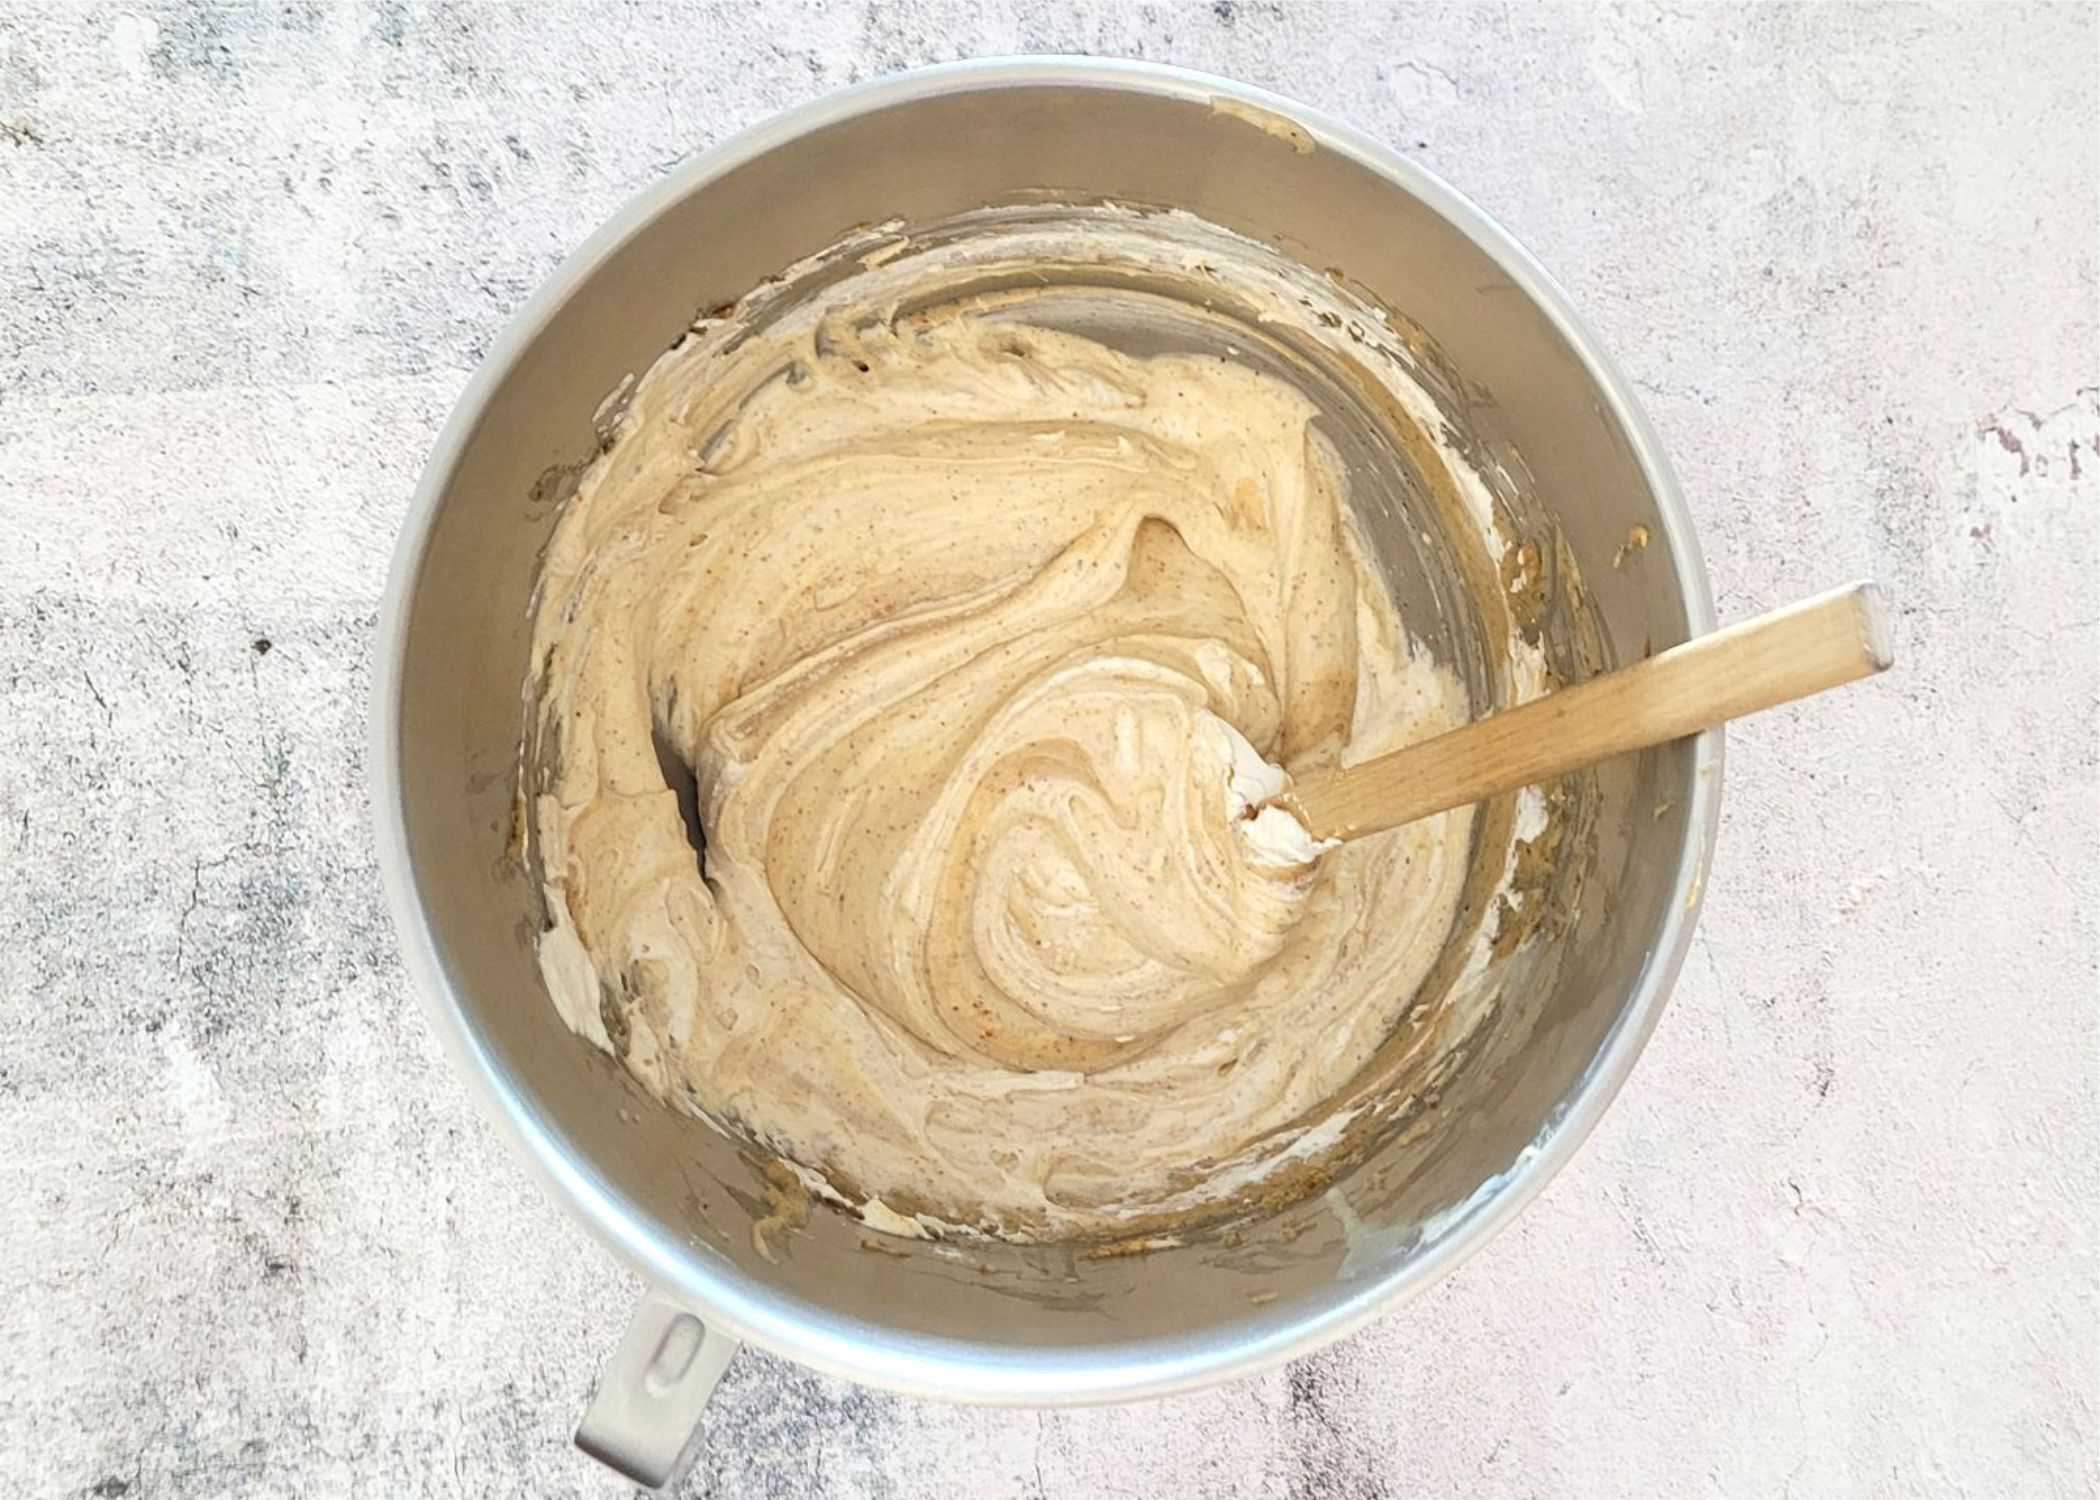 whipped cream folded into almond cream to make pie filling